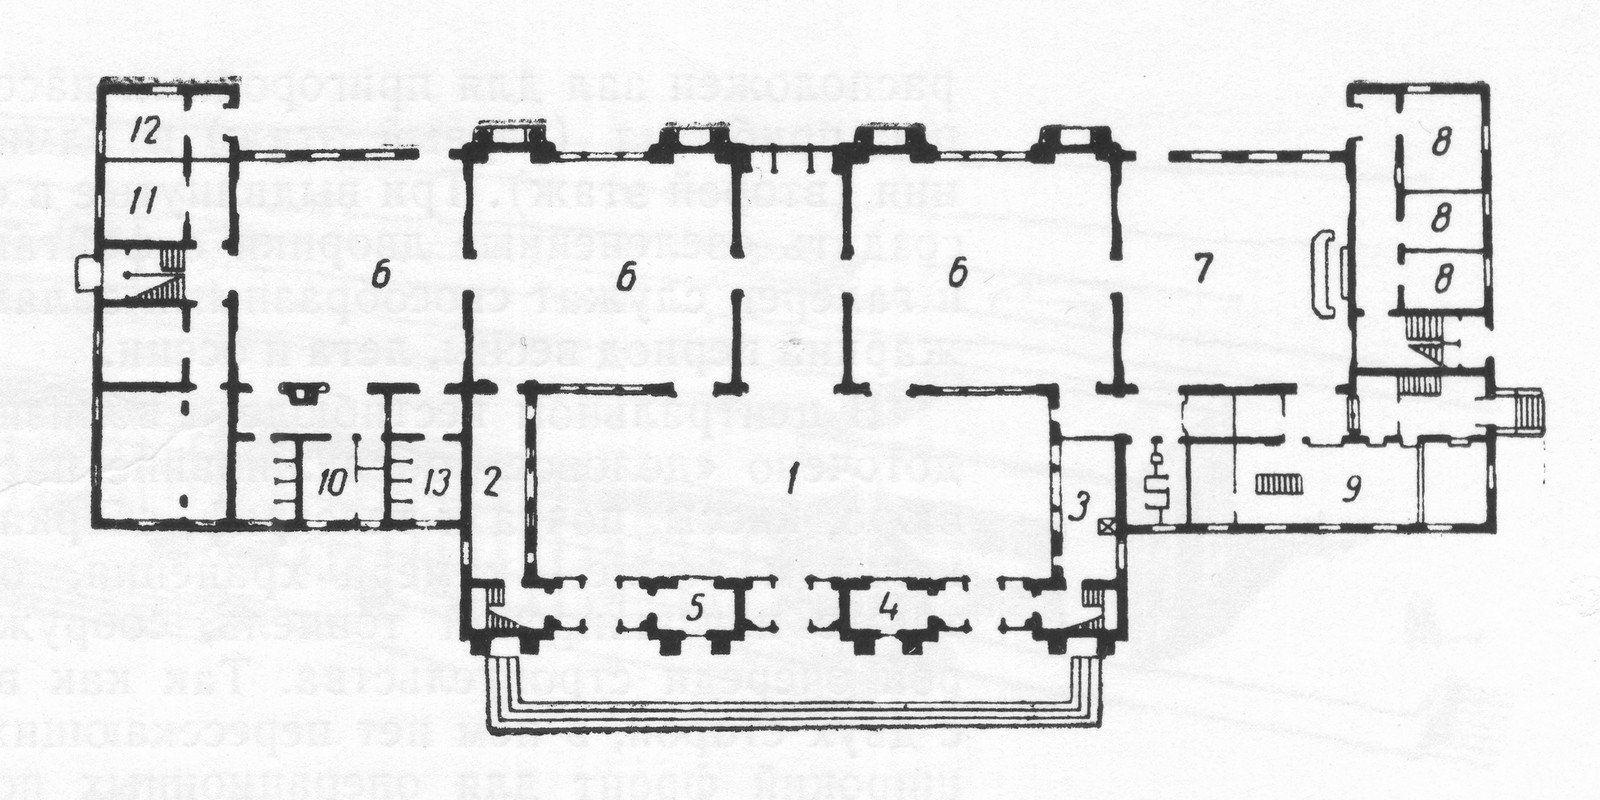 Yasynuvata, Улица Орджоникидзе, 152. Other Projects — Drawings and Plans